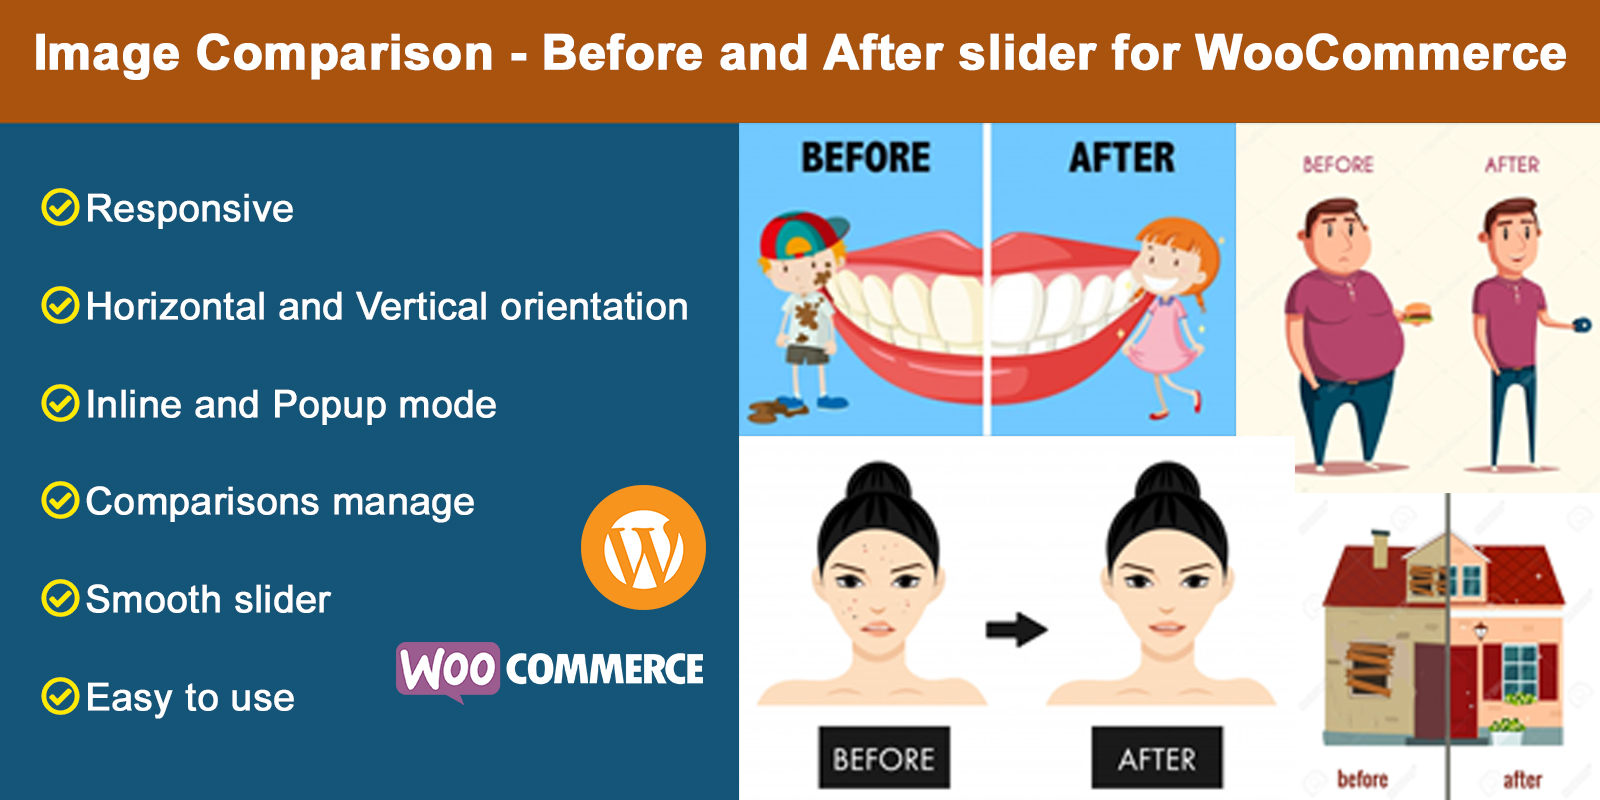 Image Comparison - Before and After slider for WooCommerce